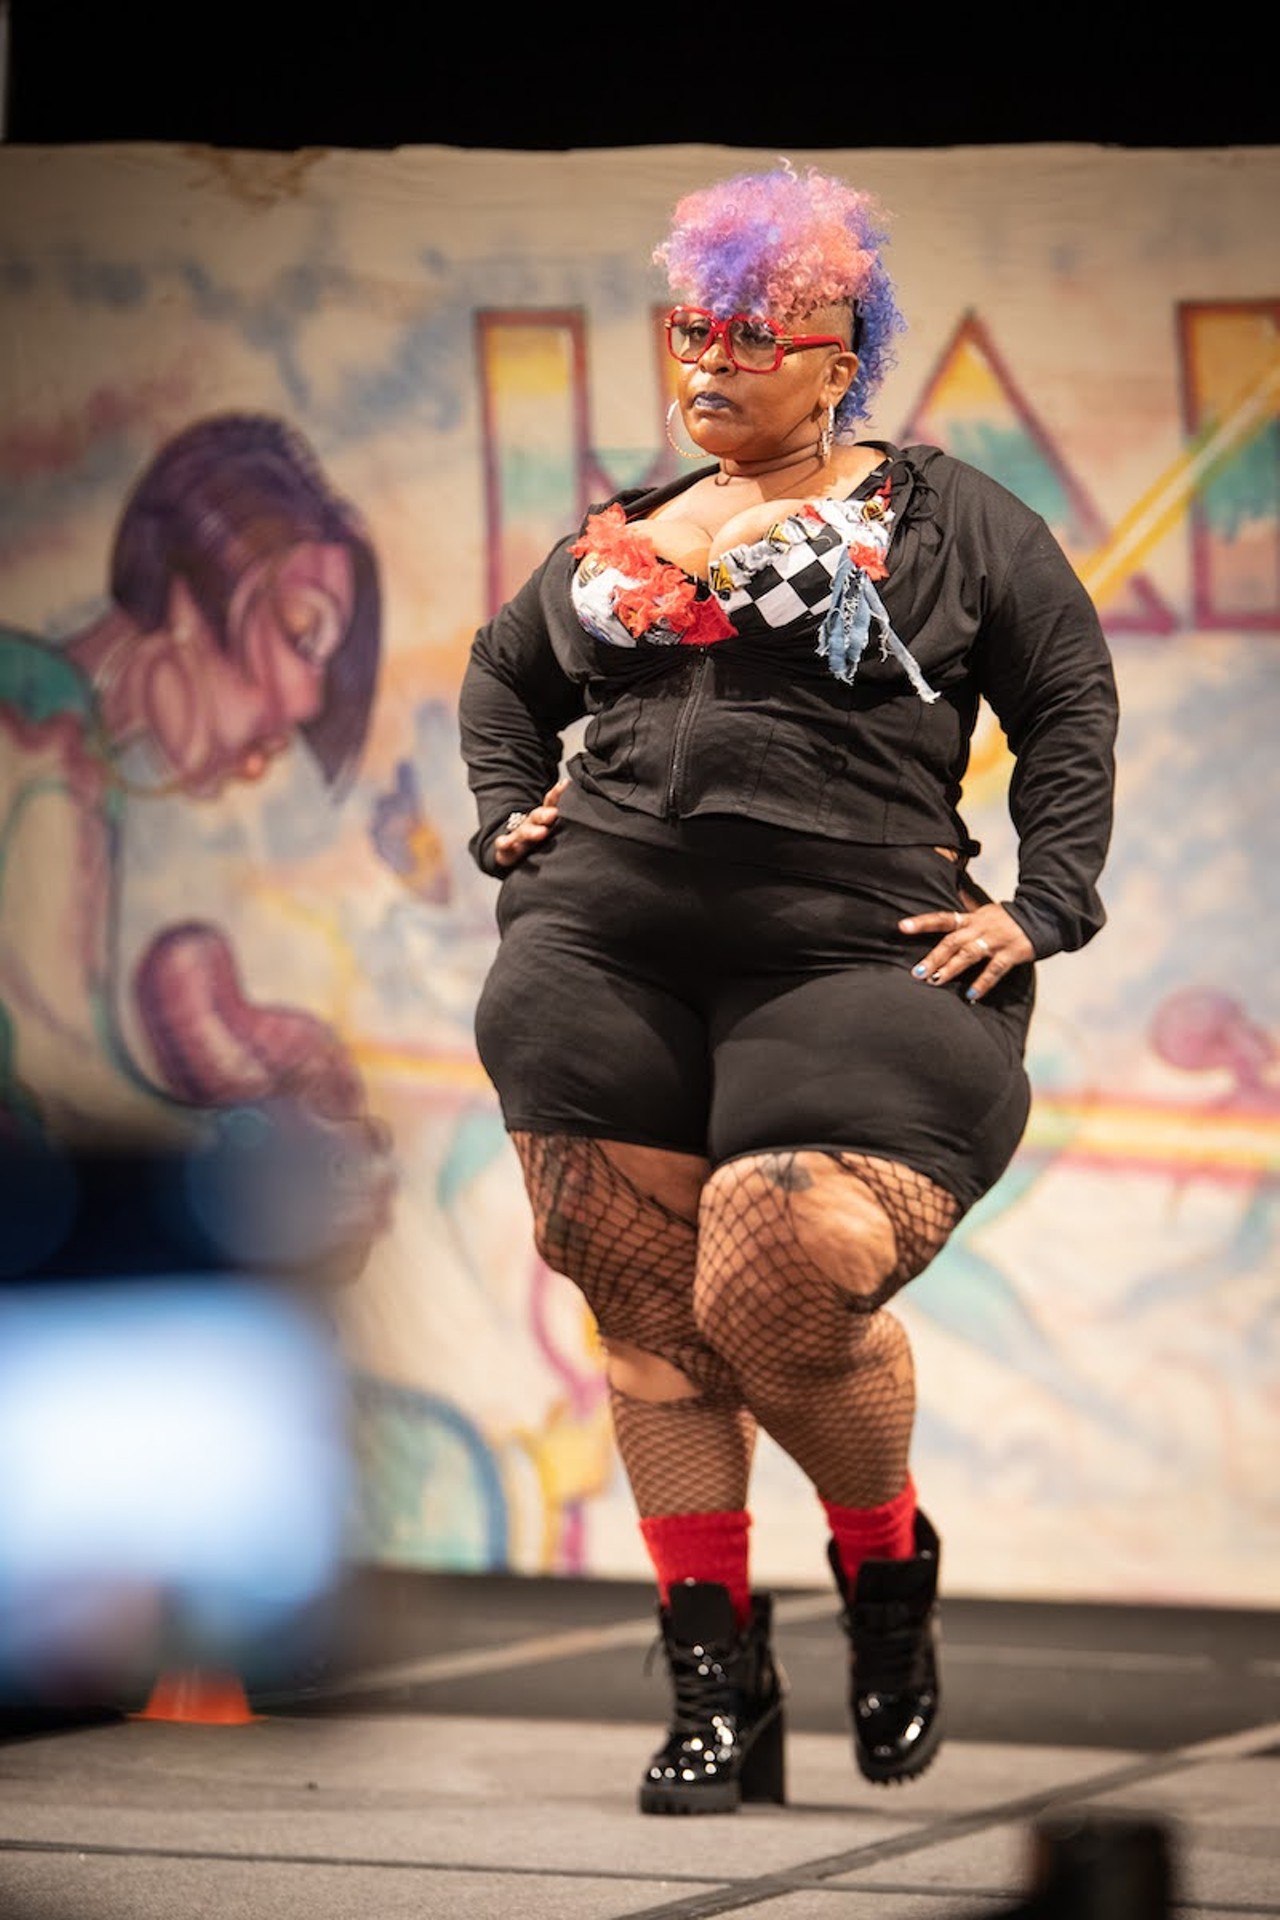 All the fabulous people and hairstyles we saw at Hair Wars Detroit